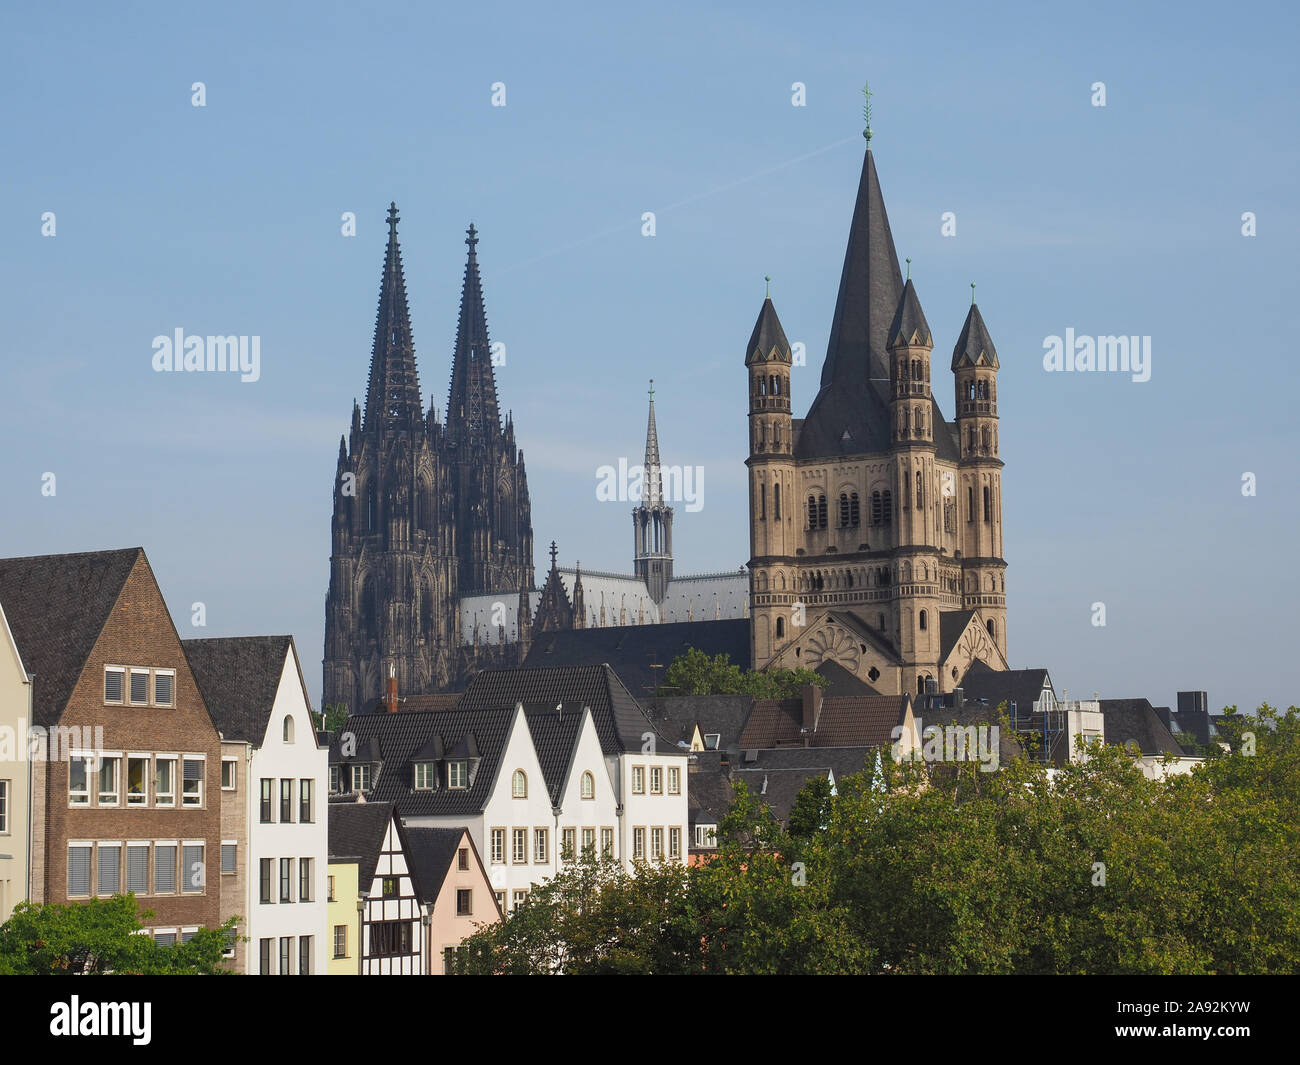 Altstadt (meaning Old Town) in Koeln, Germany Stock Photo